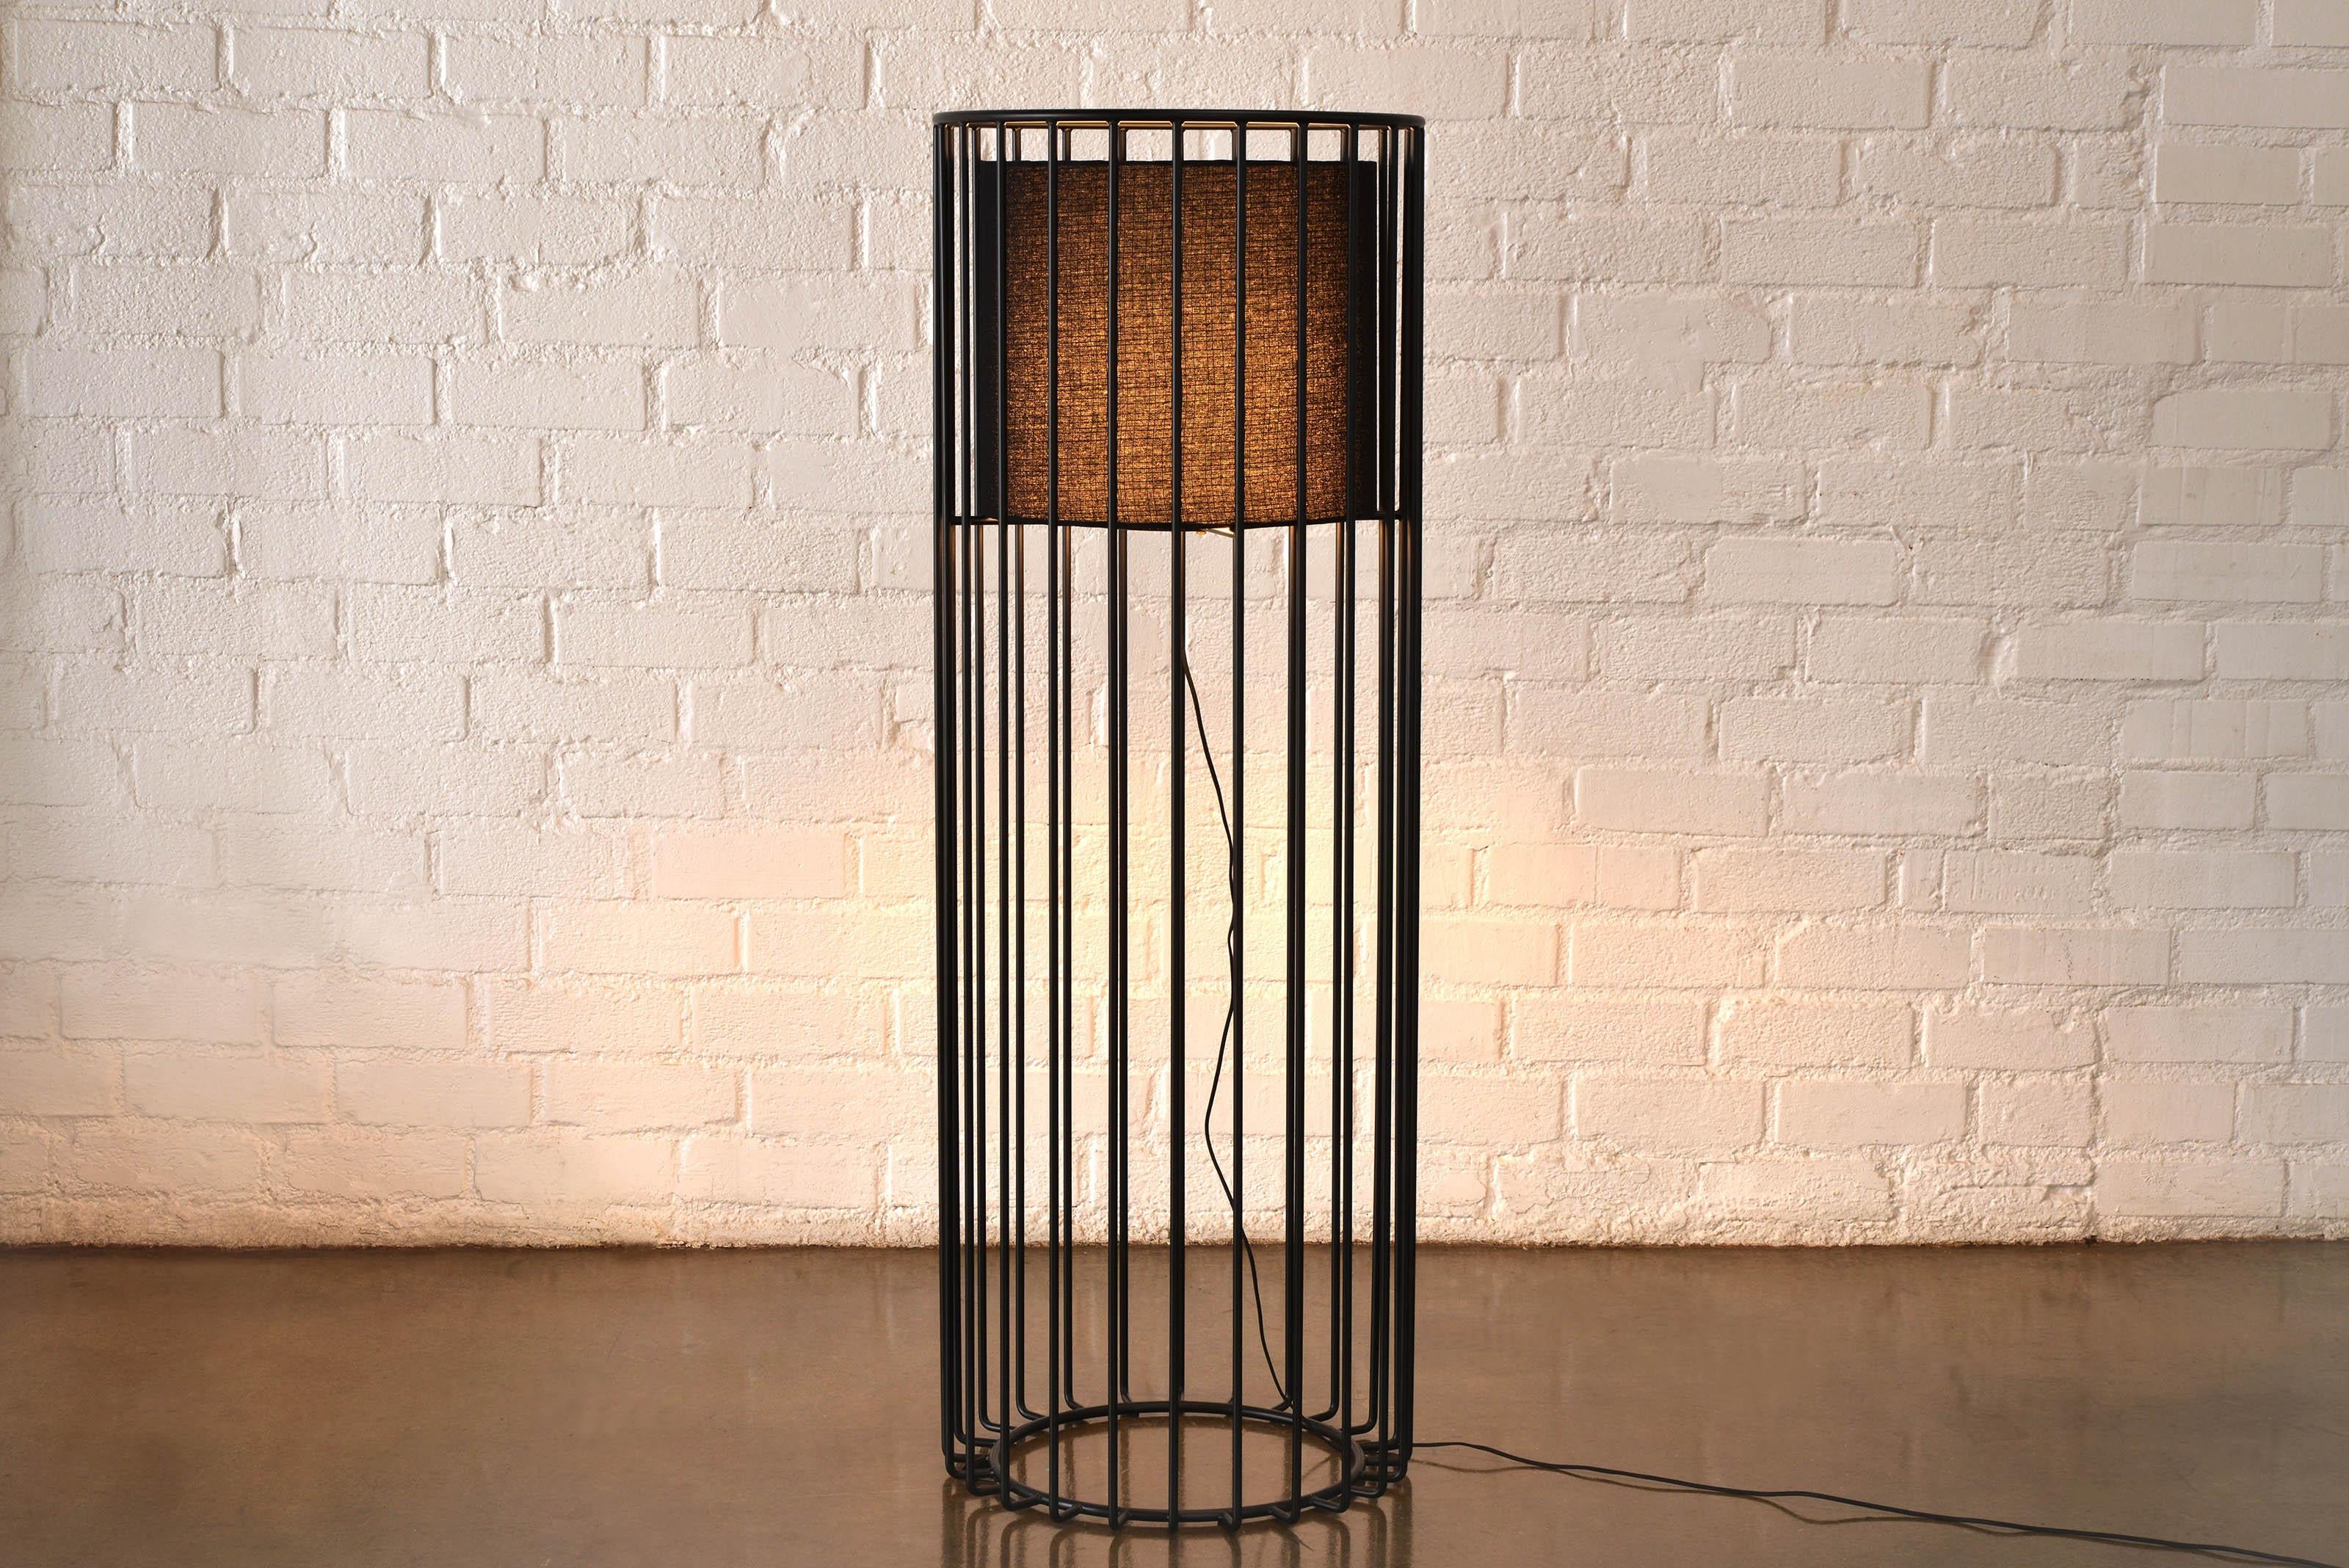 Inner Beauty Floor Light by Phase Design
Dimensions: Ø 50.8 x H 142.2 cm. 
Materials: Black linen and powder coated metal.

Solid steel bar available in a smoked brass, polished chrome, burnt copper, gloss or flat black and white powder coat. Powder